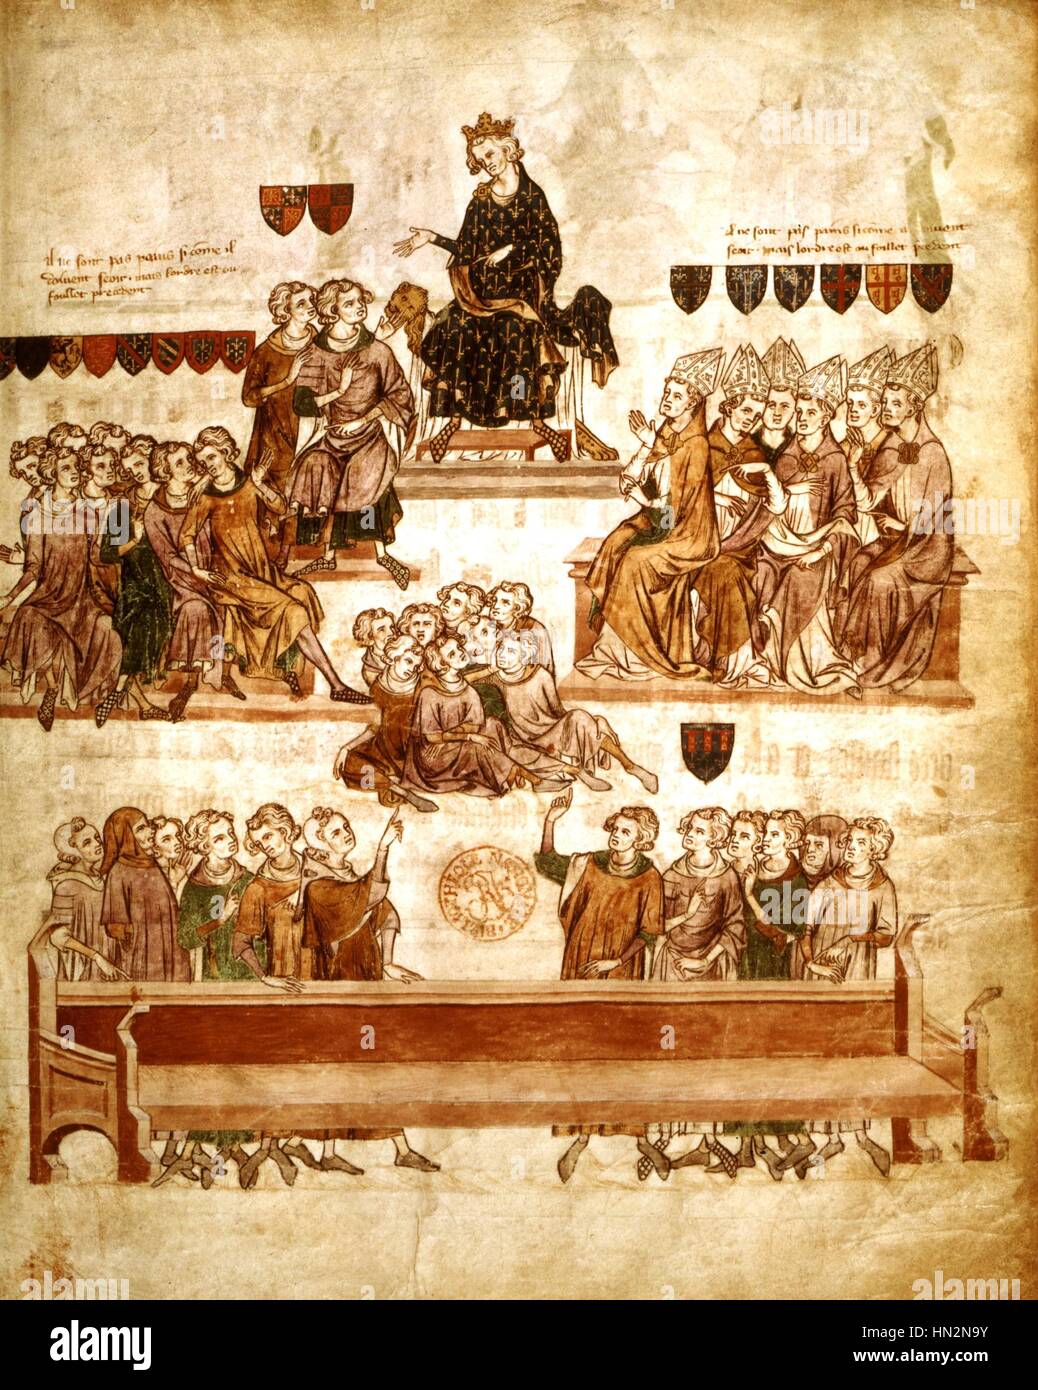 Philip IV 'le Bel' (the Fair) presiding over a Parliament session (from the acts of Robert of Artois' trial in 1330) 14th century France Paris. Bibliotheque nationale Stock Photo